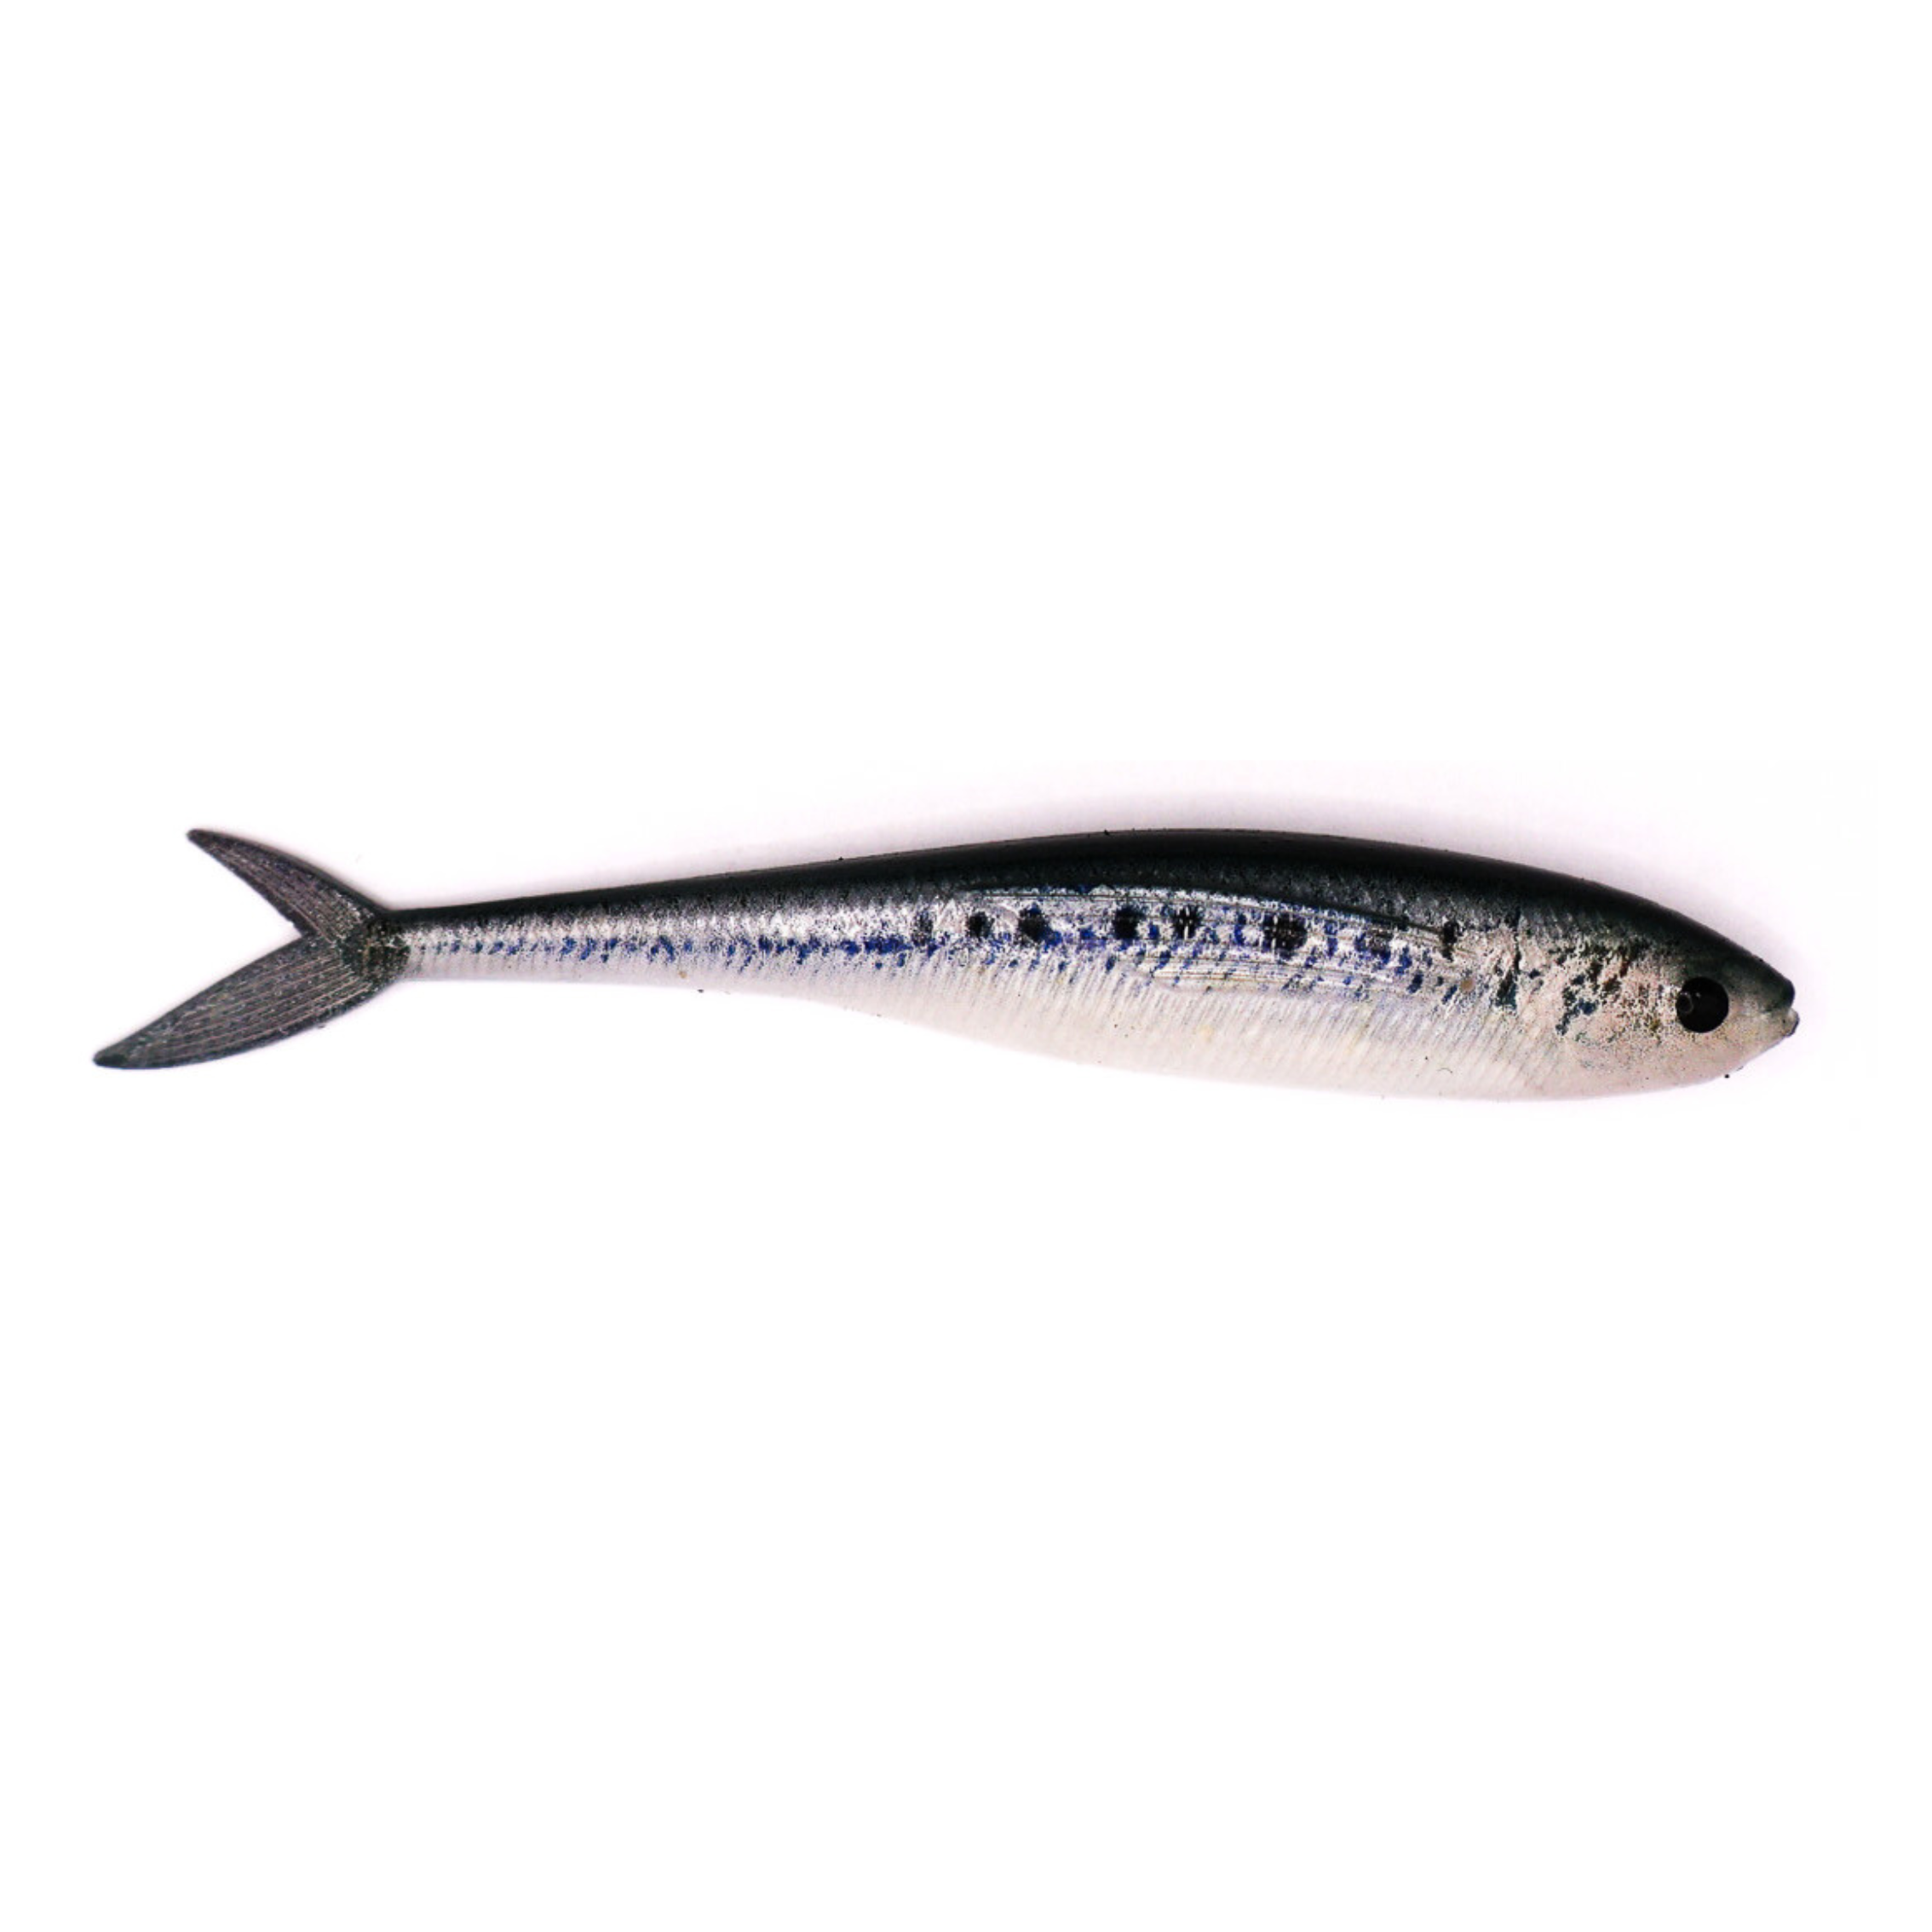 https://stackle.com.au/wp-content/uploads/2023/09/fish-tail-minnow.png